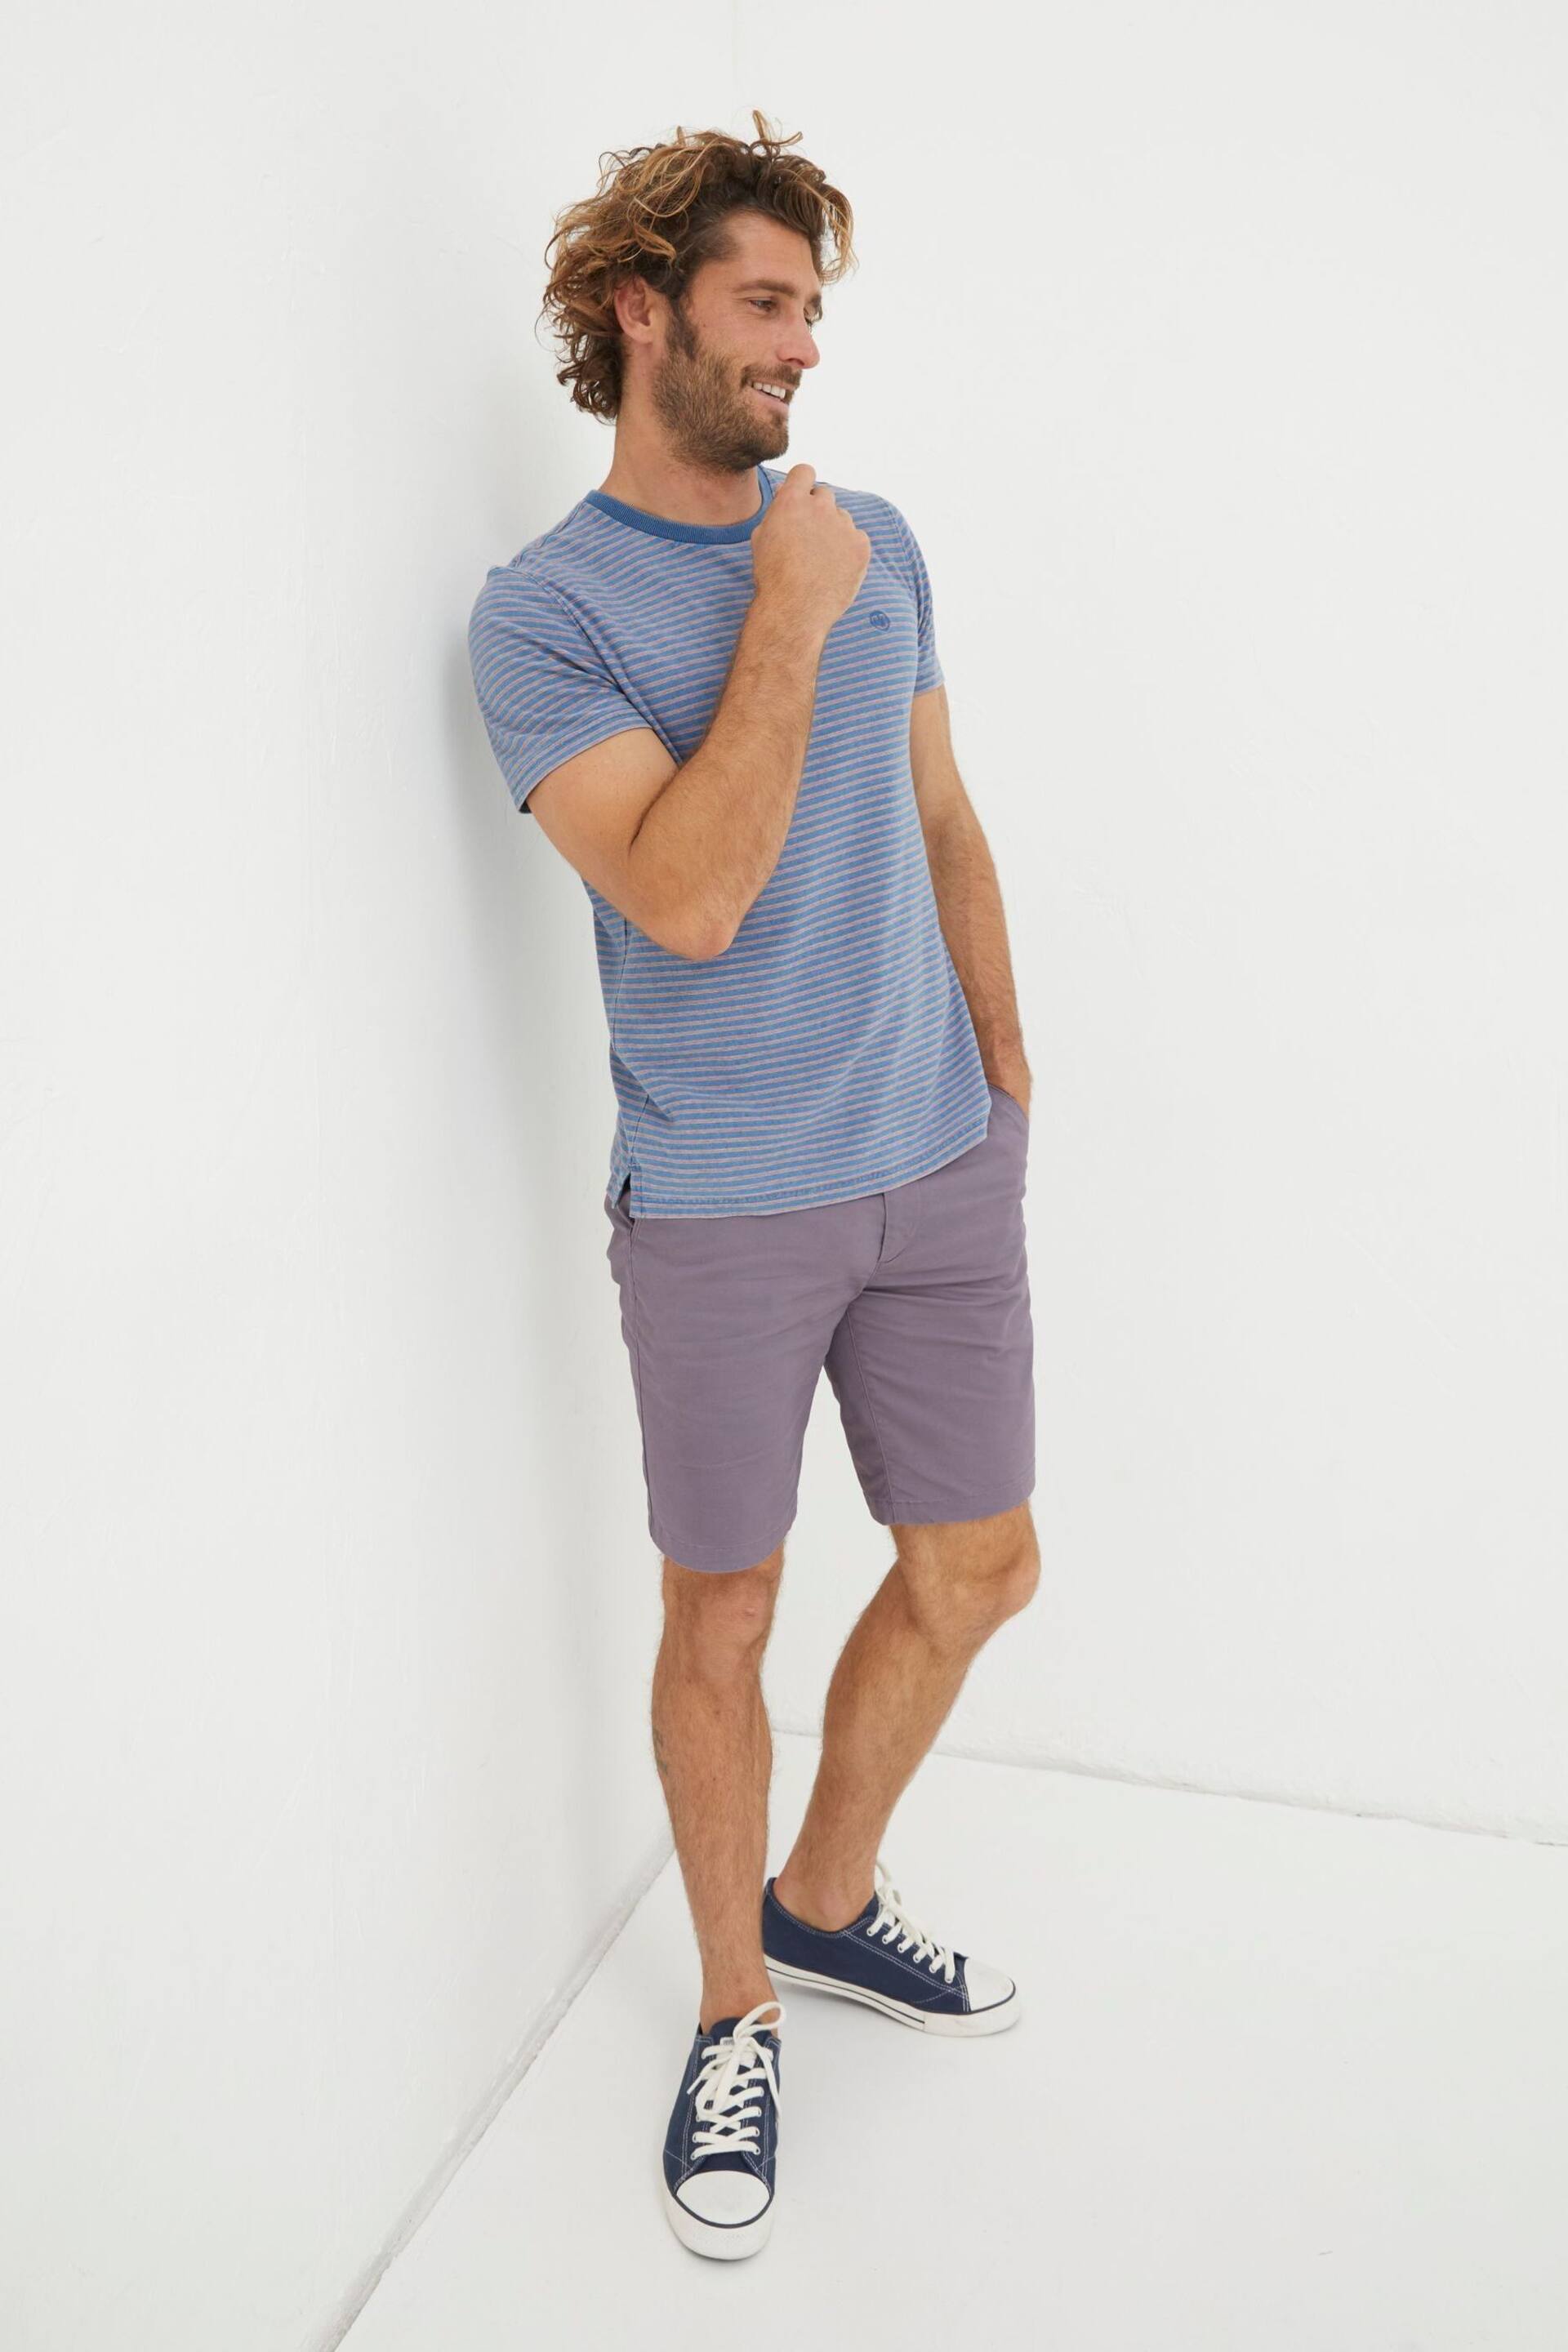 FatFace Purple Mawes Chinos Shorts - Image 1 of 5